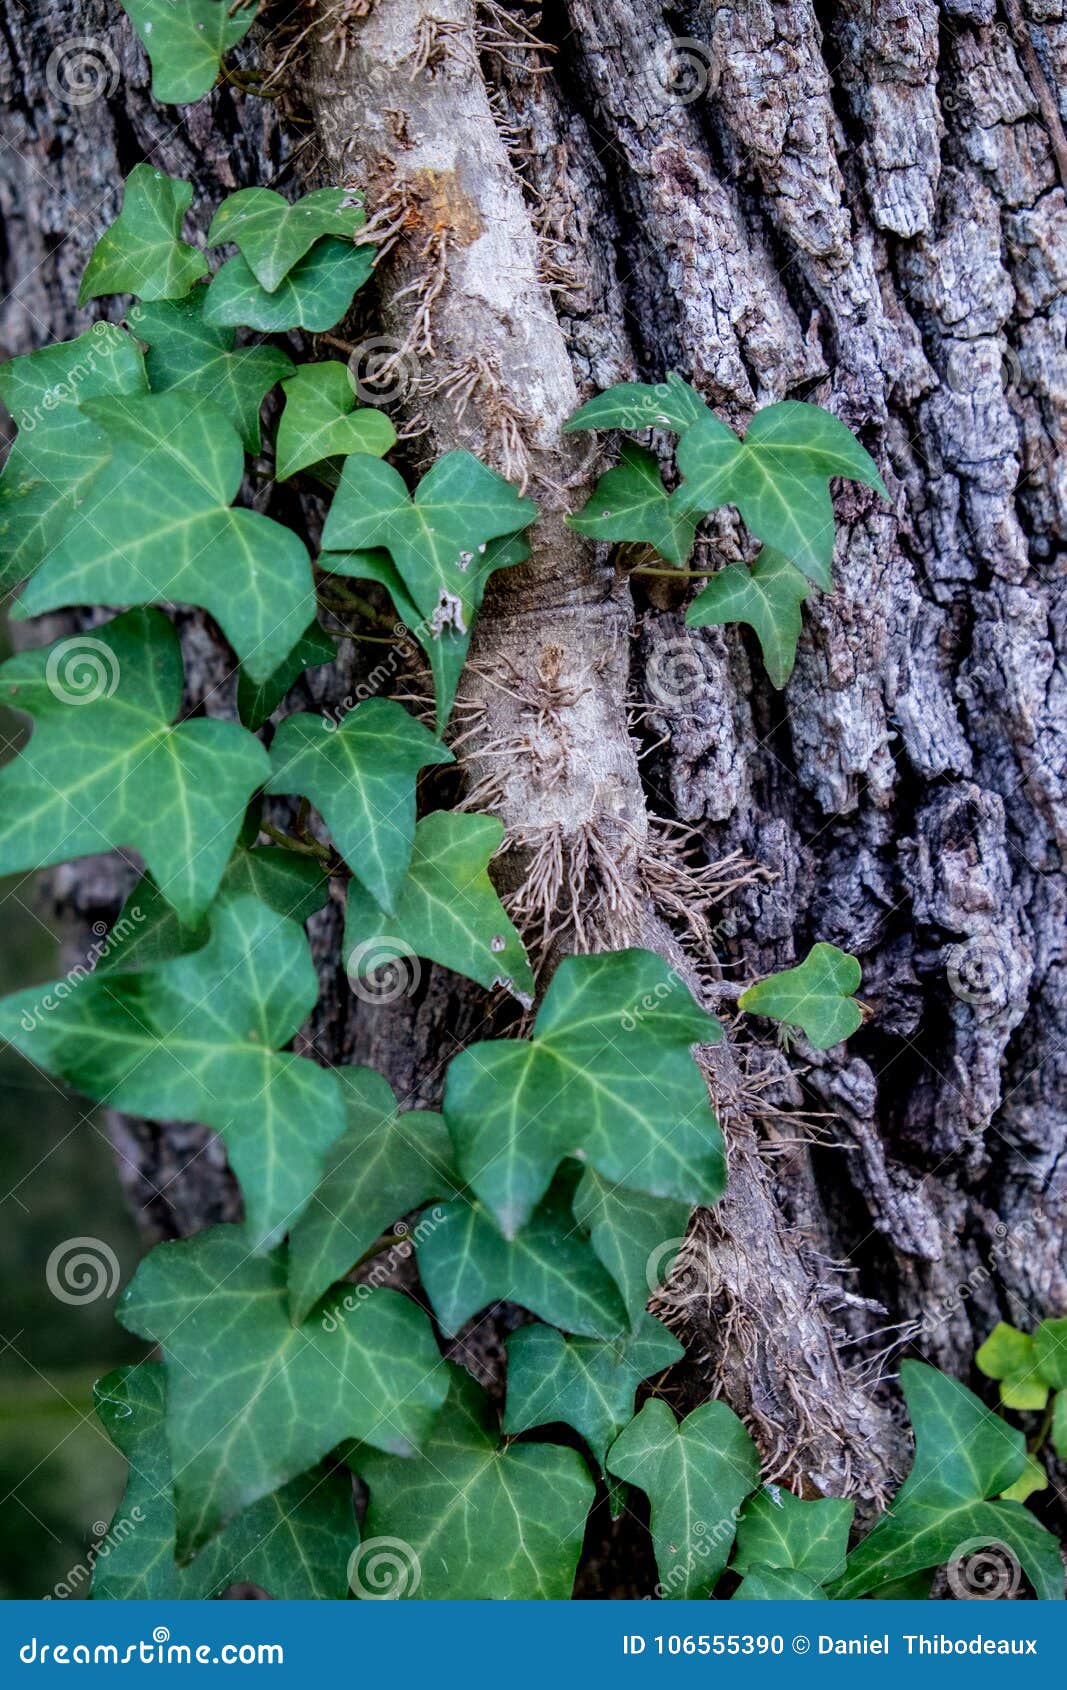 Wallflowers Fine Art Photography Nature Photo Ivy Print Creeping Ivy English Ivy Ivy Photo Vines on Wall Yellow Flowers Climber